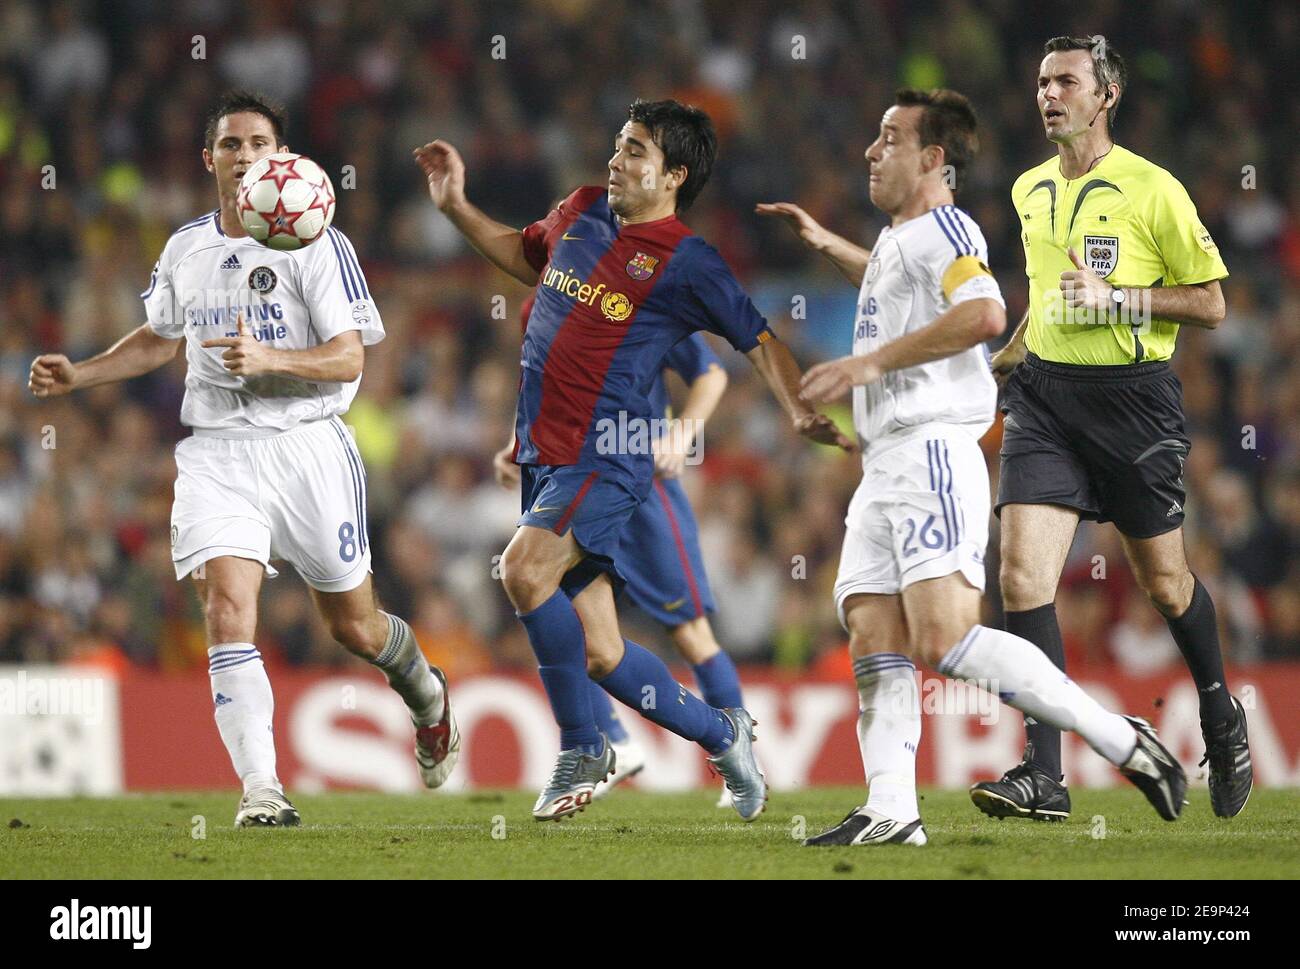 Barcelona's Deco and Chelsea's Frank Lampard in action during the UEFA Champions League, Group A, Barcelona vs Chelsea at the Camp Nou stadium in Barcelona, Spain on October 31, 2006. The match ended in a 2-2 draw. Photo by Christian Liewig/ABACAPRESS.COM Stock Photo